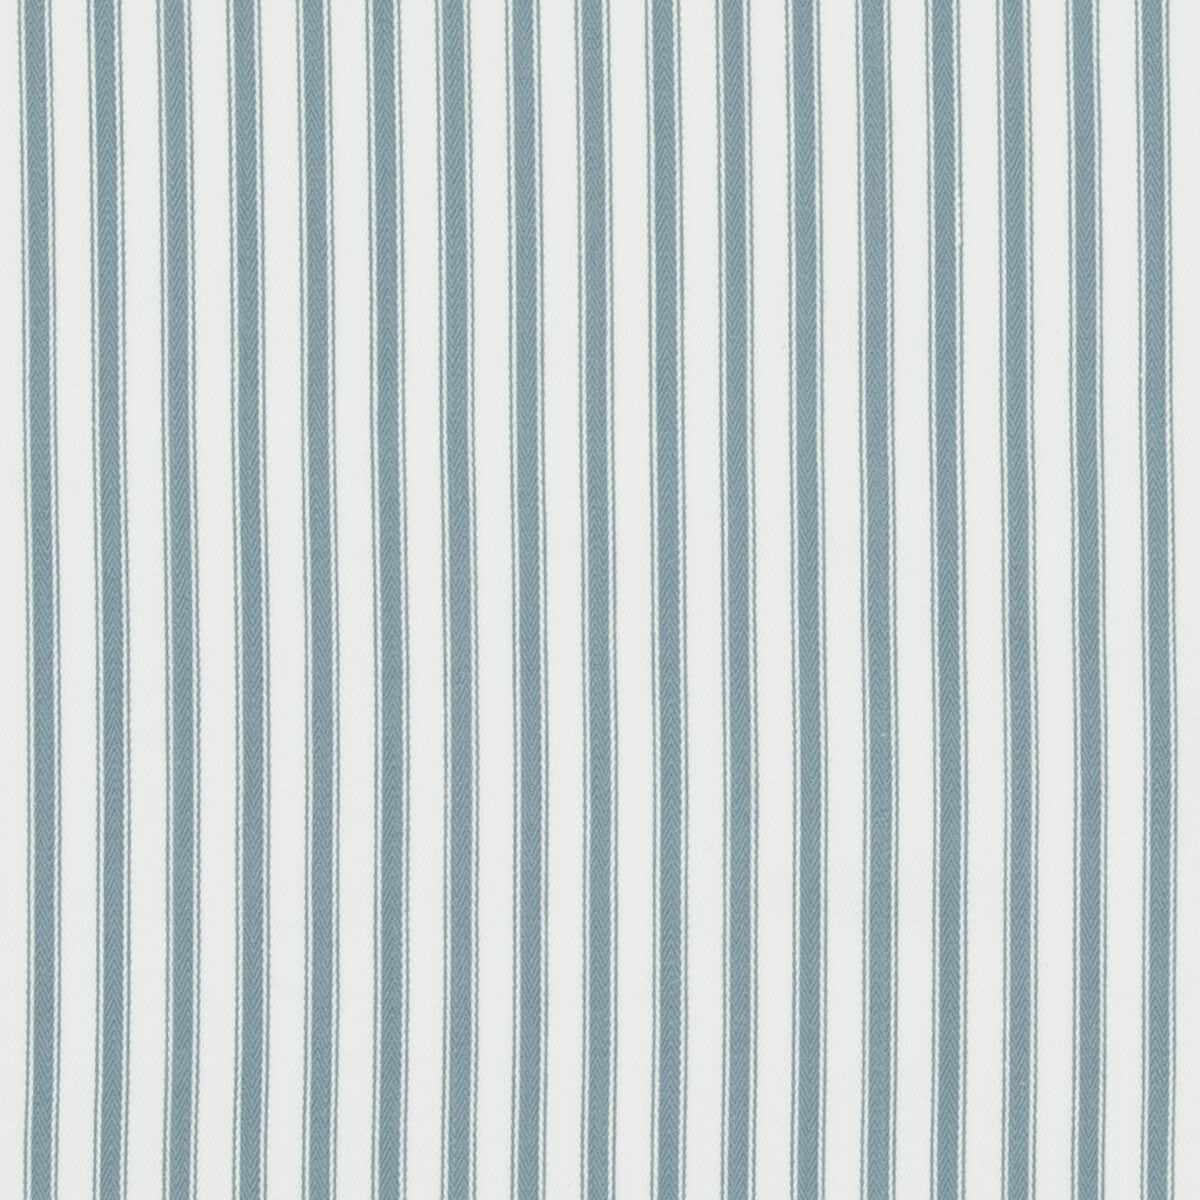 Sherborne Ticking fabric in aqua color - pattern PF50505.725.0 - by Baker Lifestyle in the Bridport collection